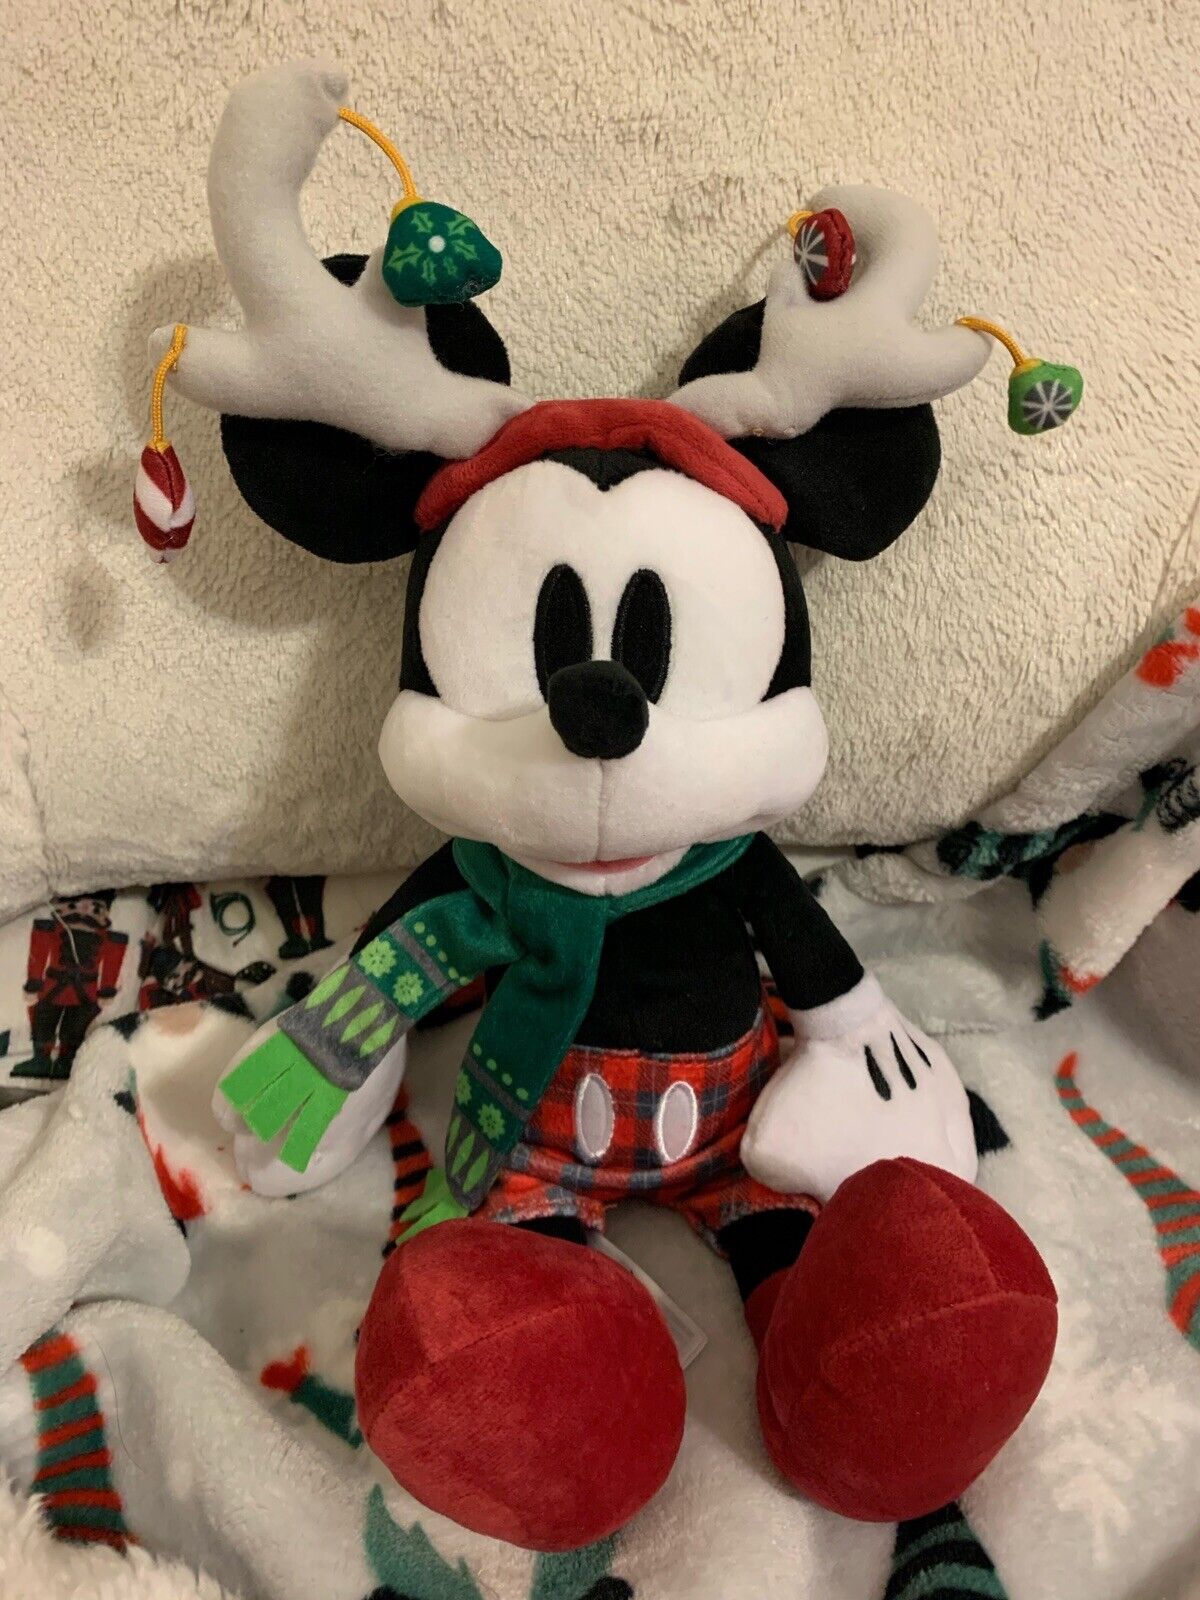 Disney Store Exclusive Christmas Antlers Mickey Mouse Plush Stuffed